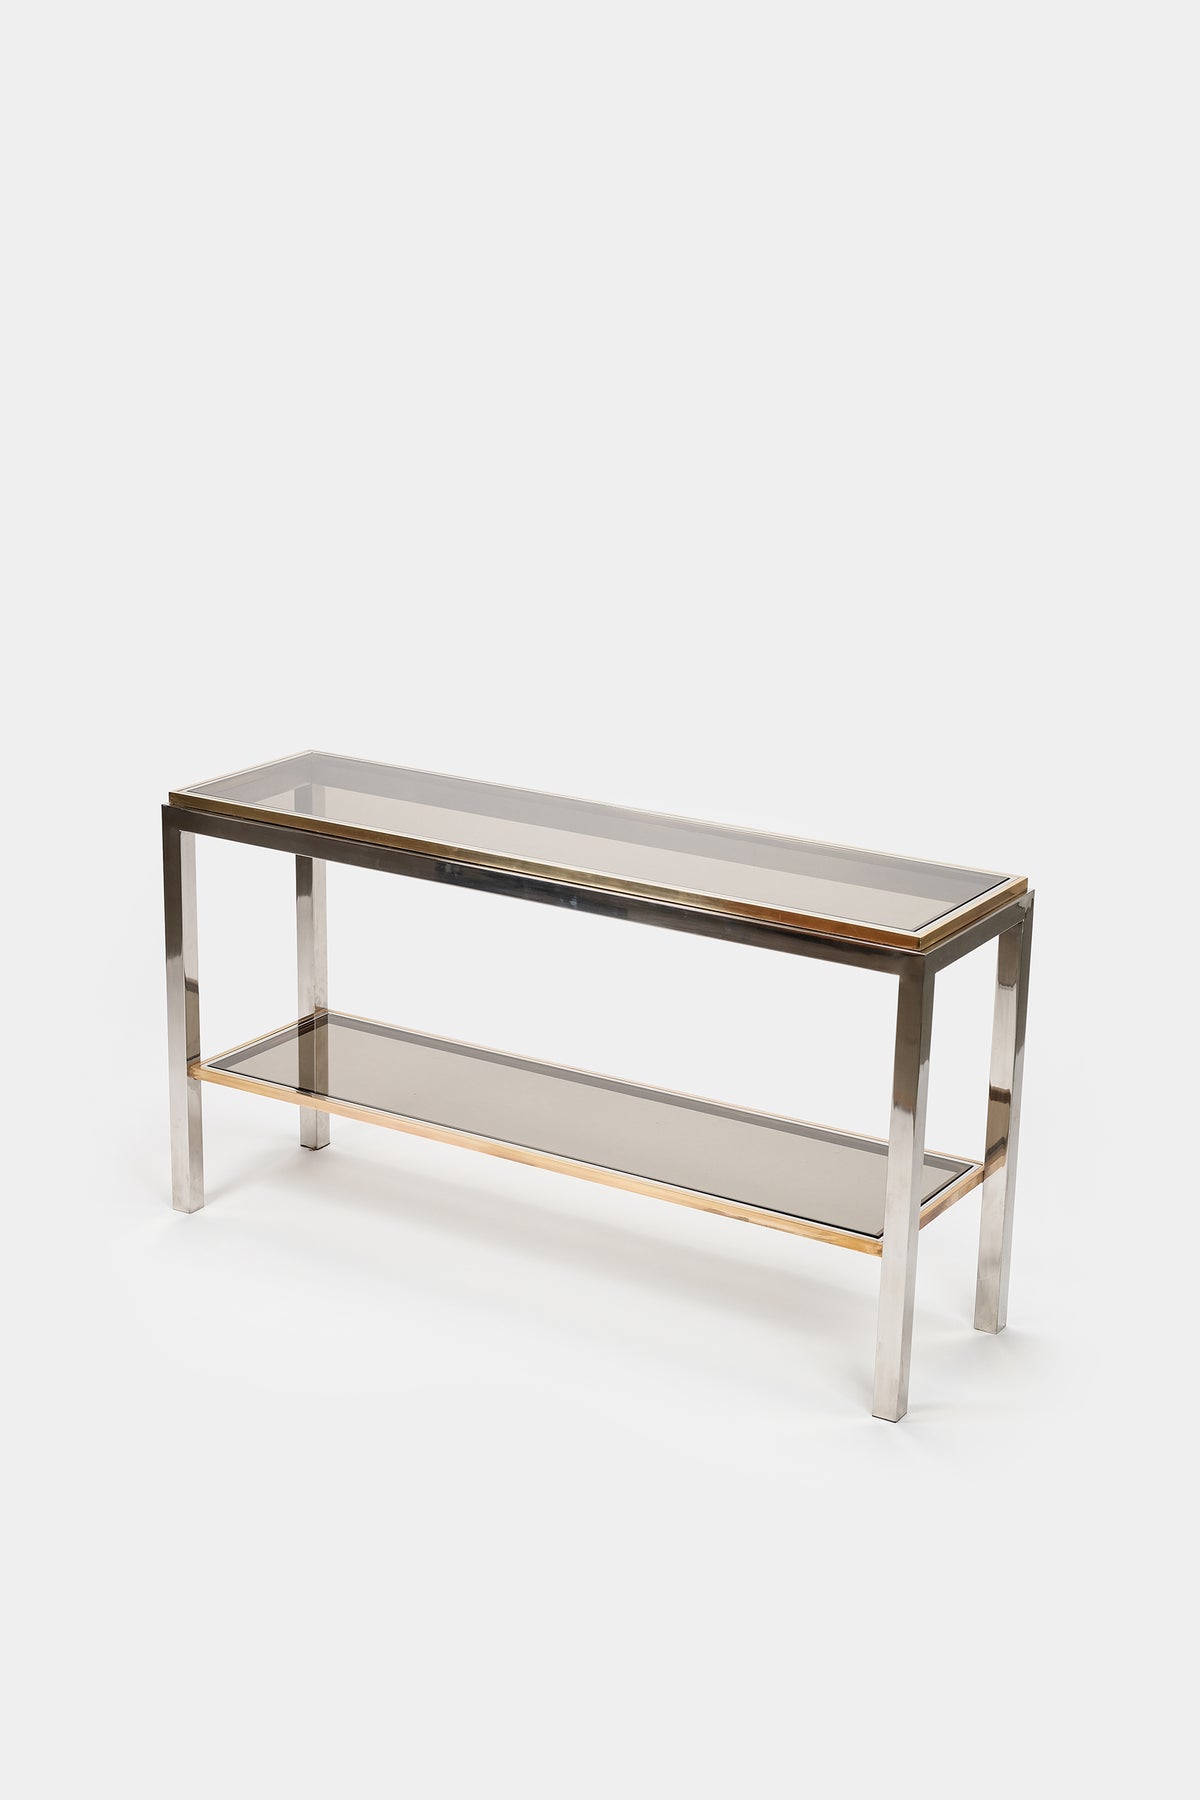 Willy Rizzo, Flaminia Console, Italy, 70s